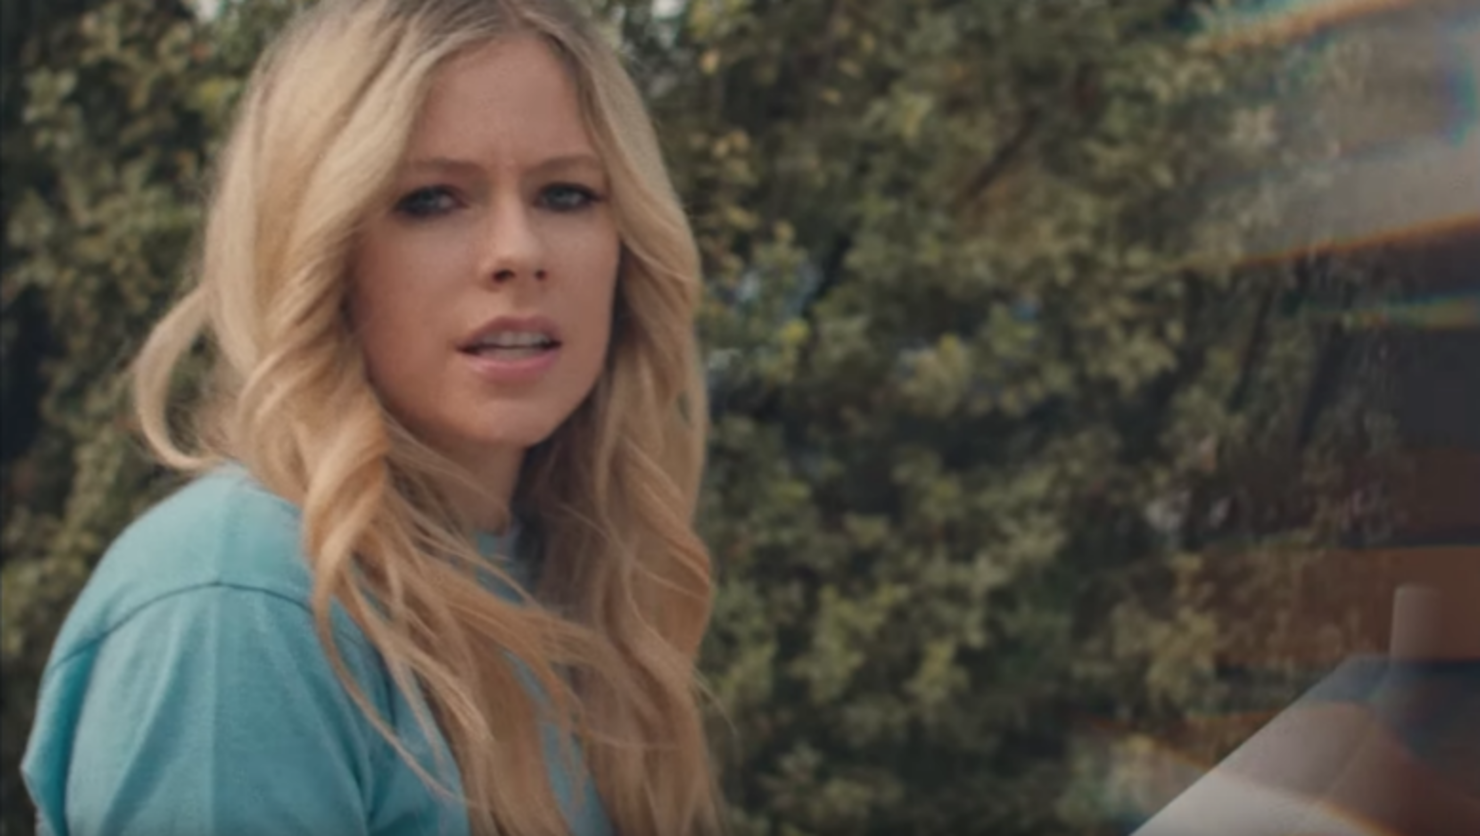 Review: Tell Me It's Over by Avril Lavigne